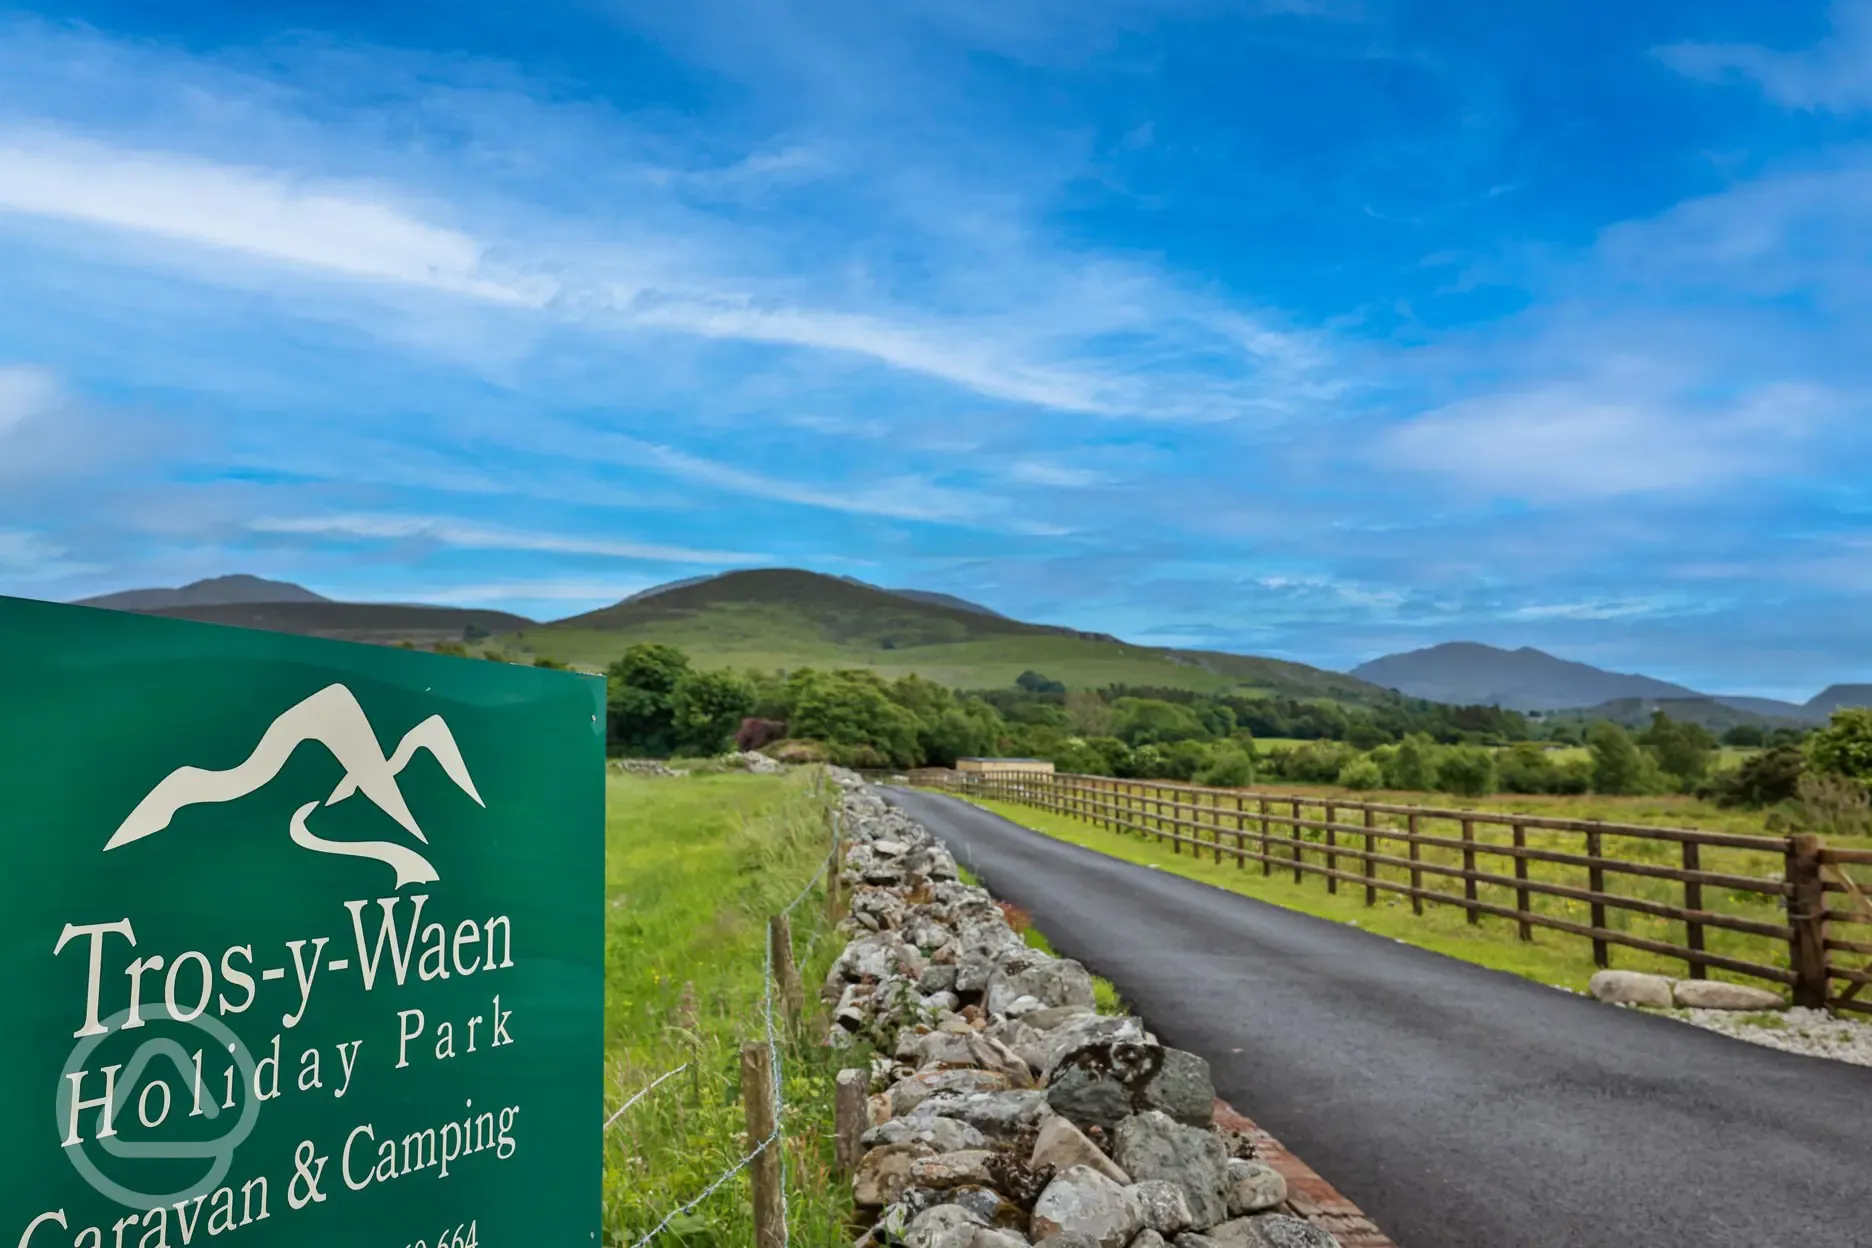 Entrance to site with Snowdon in the background